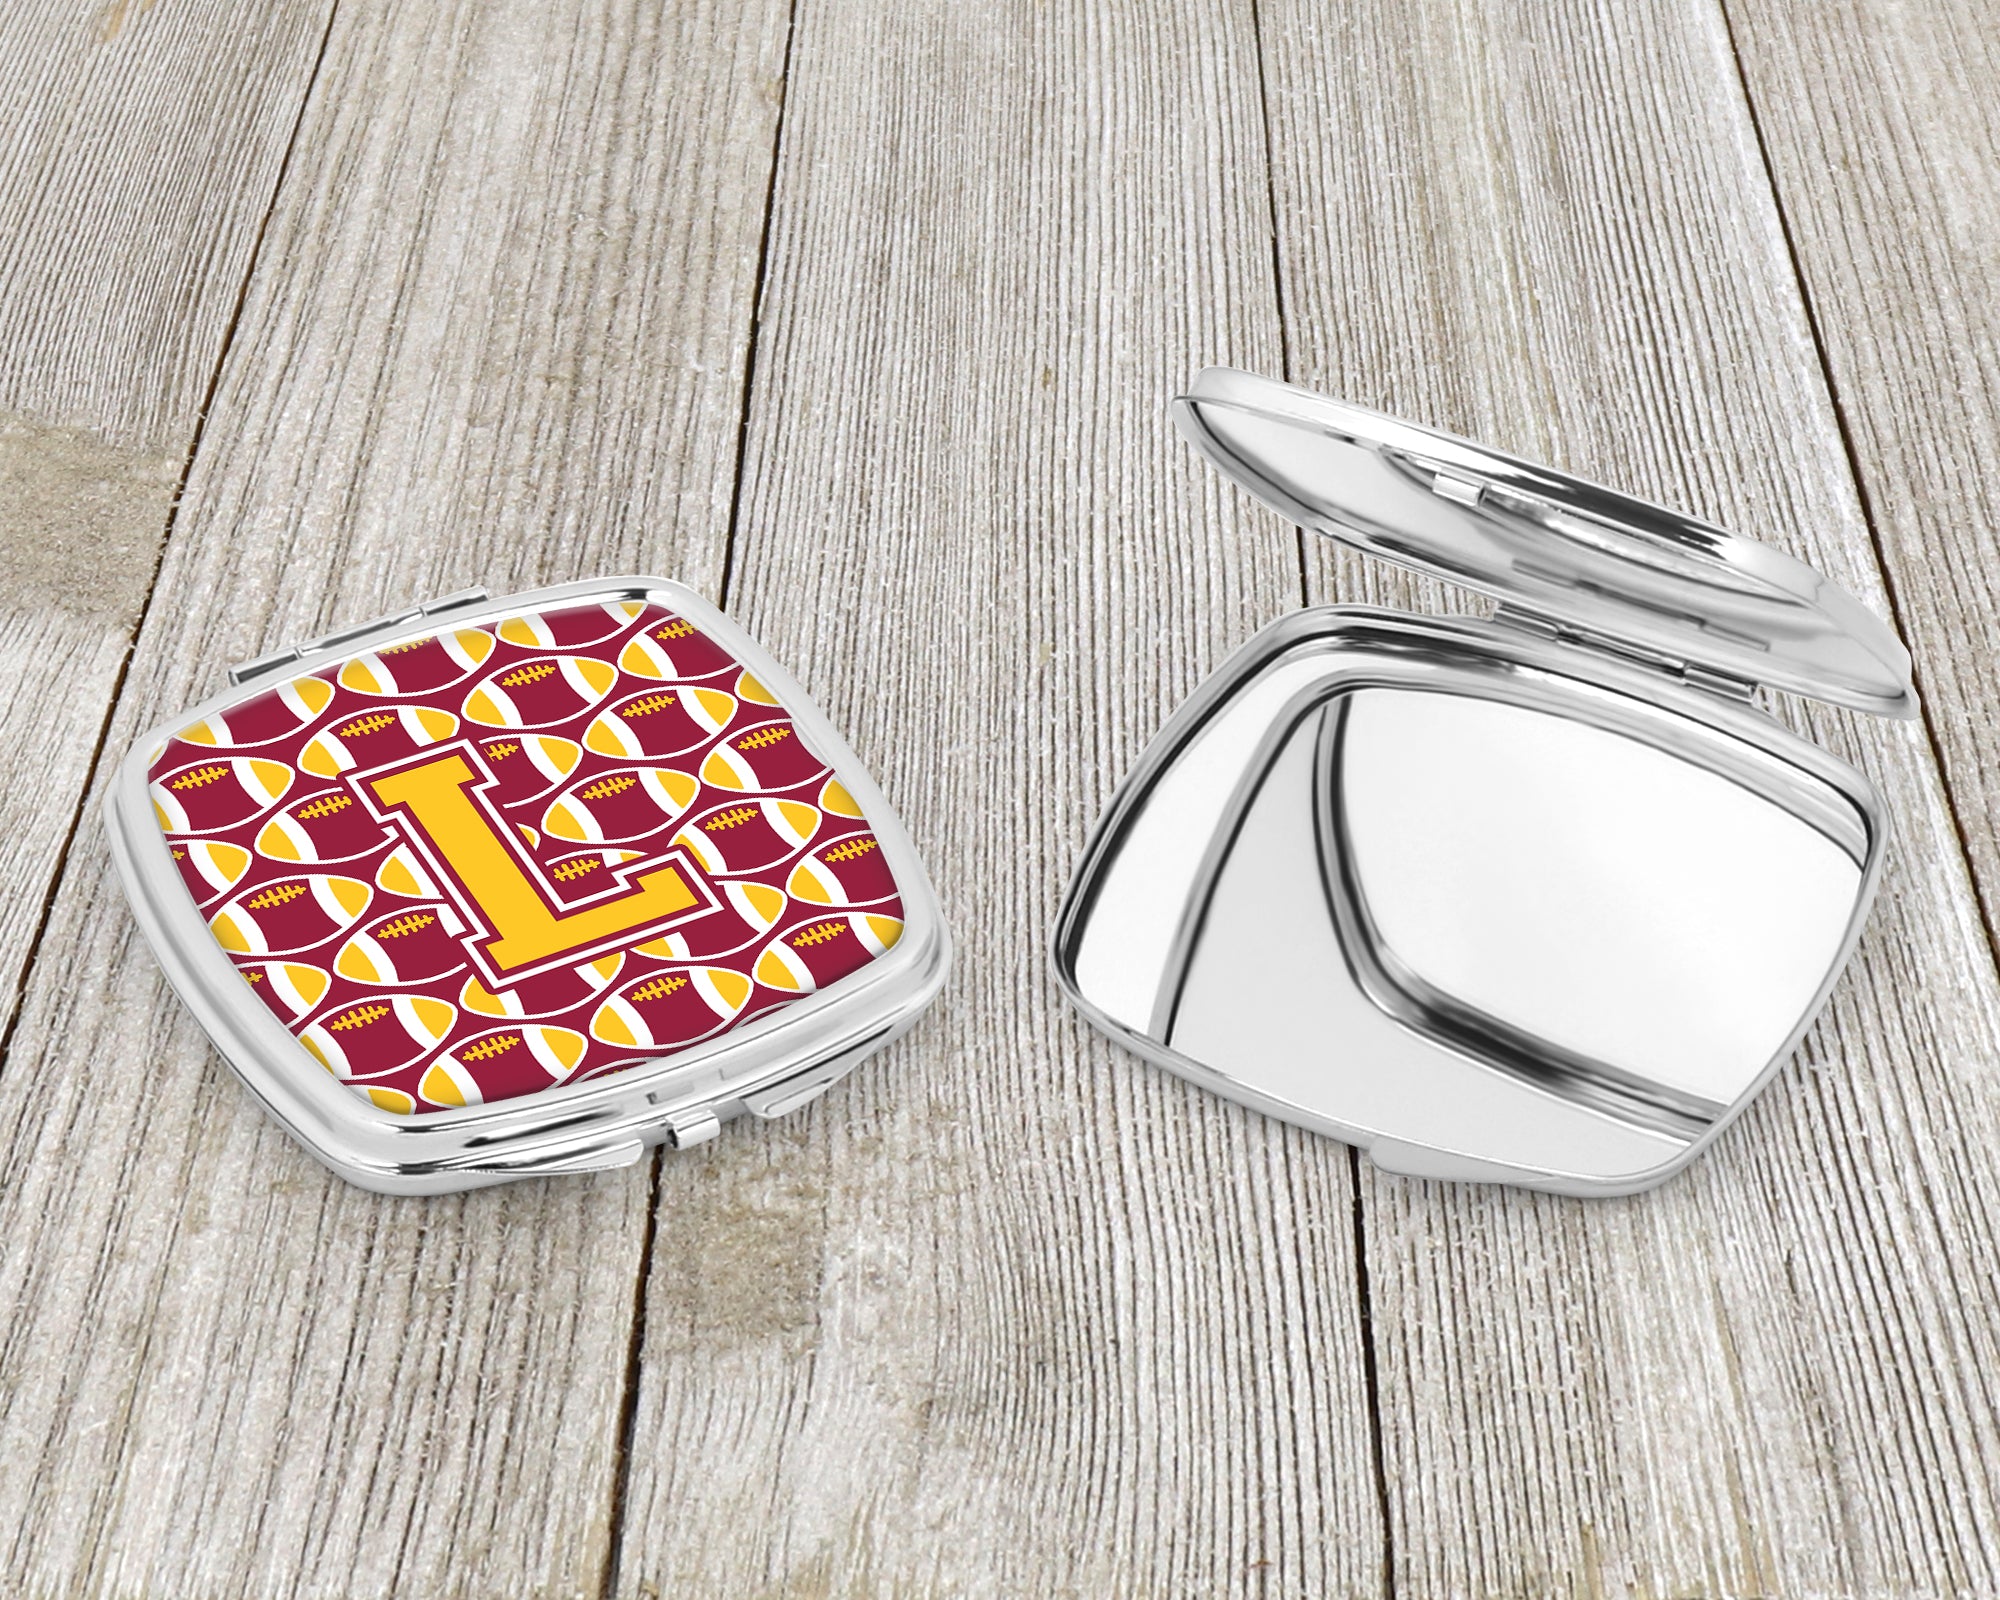 Letter L Football Maroon and Gold Compact Mirror CJ1081-LSCM